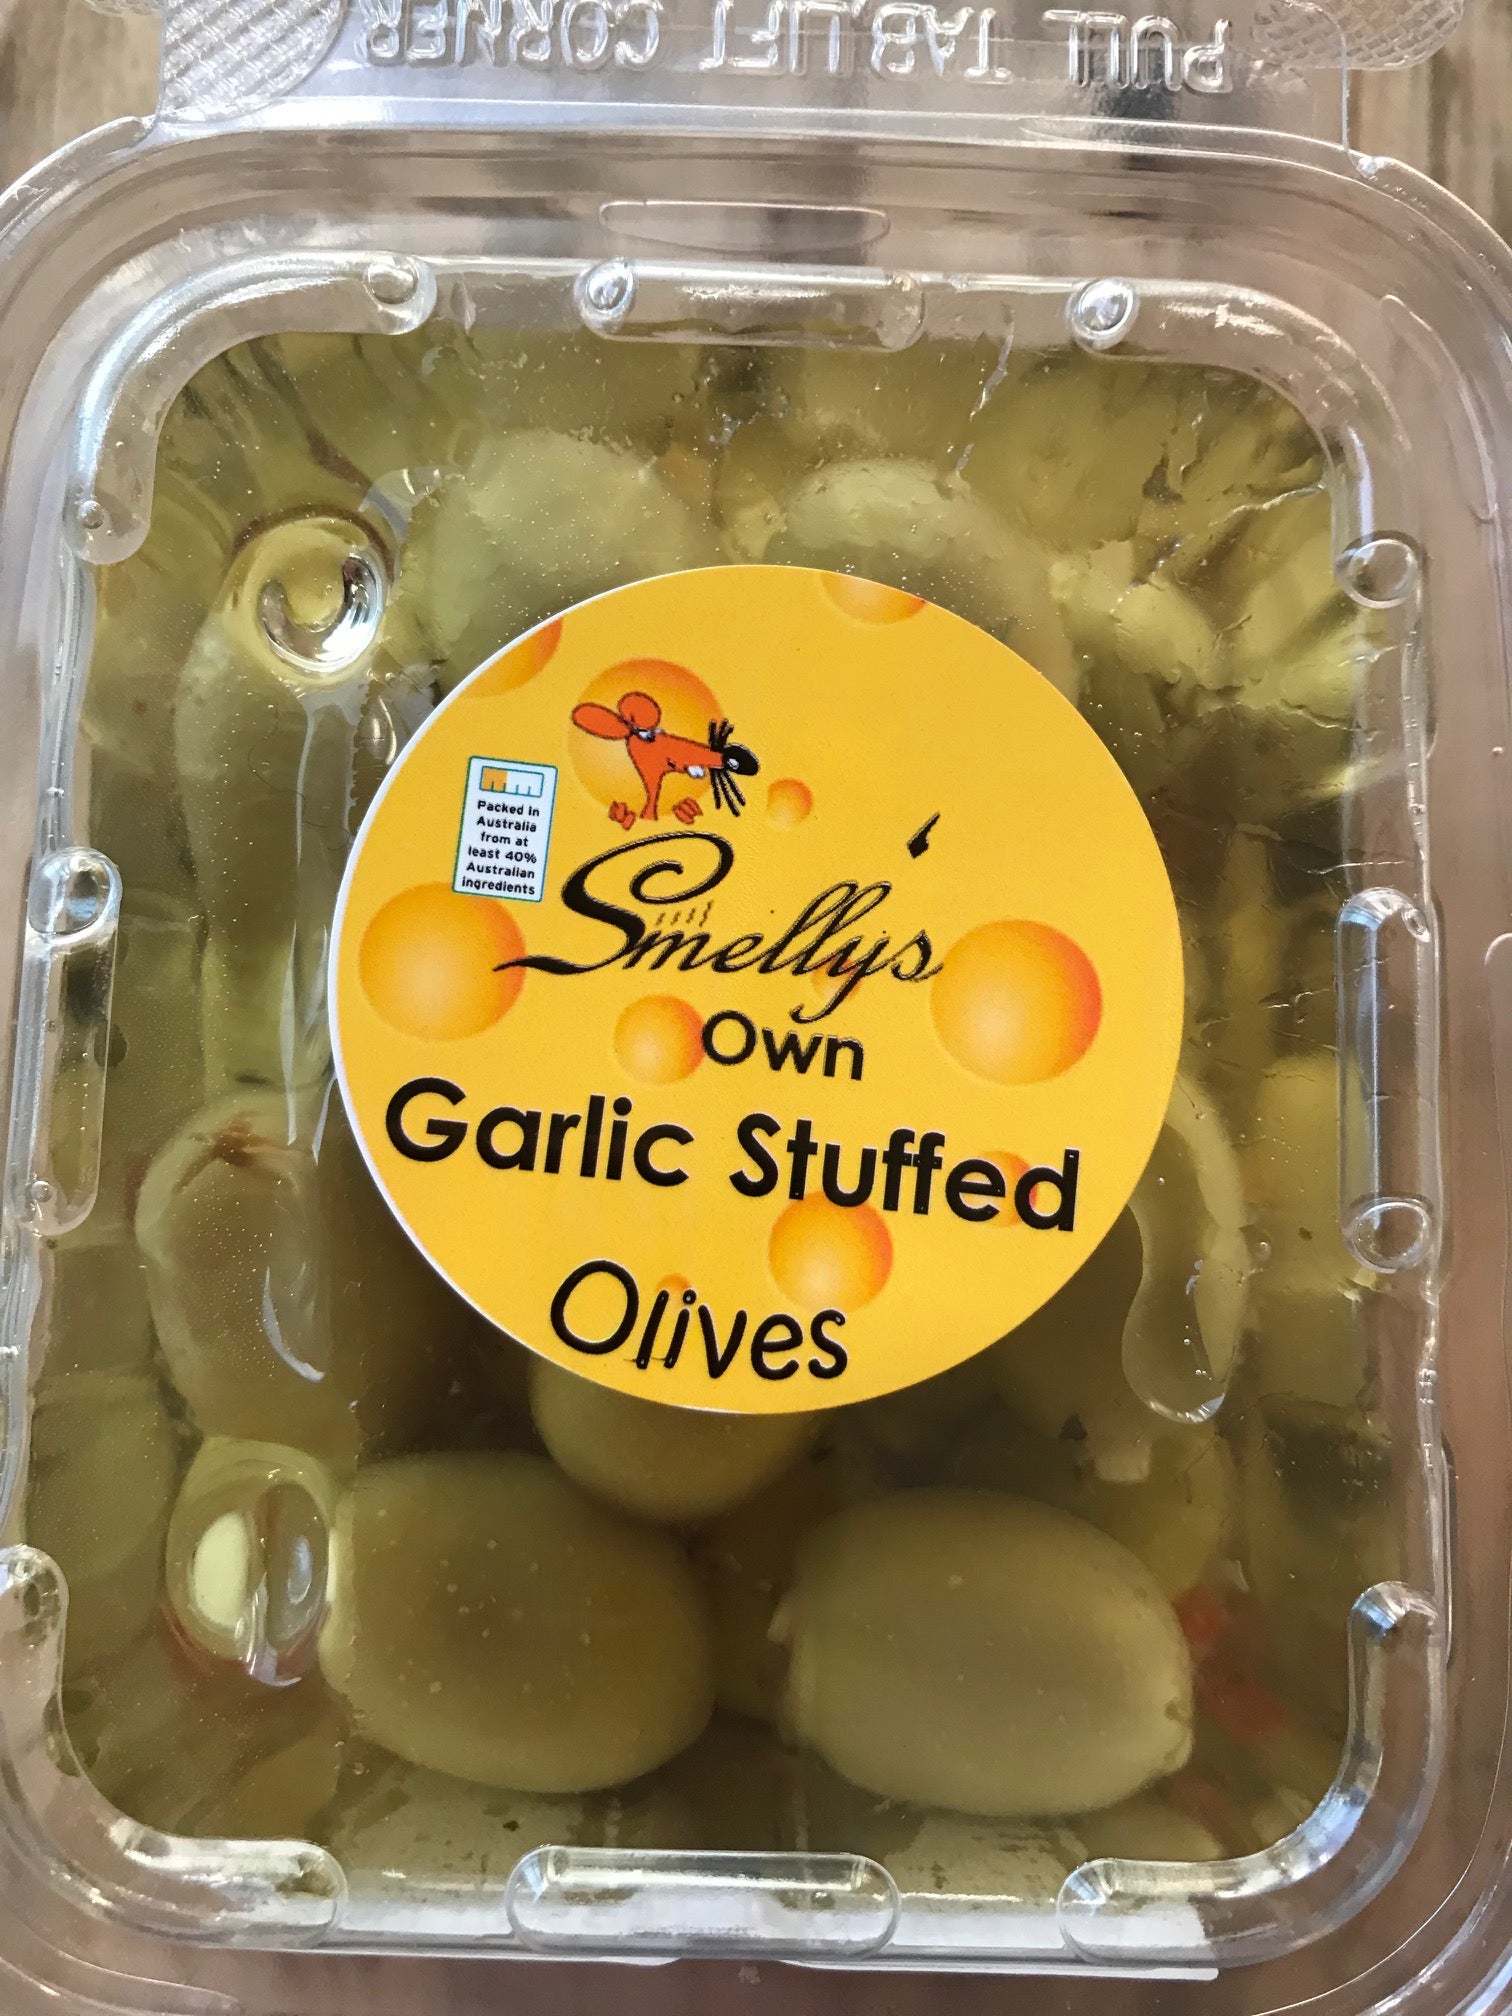 Smelly's Own Garlic Stuffed Olives